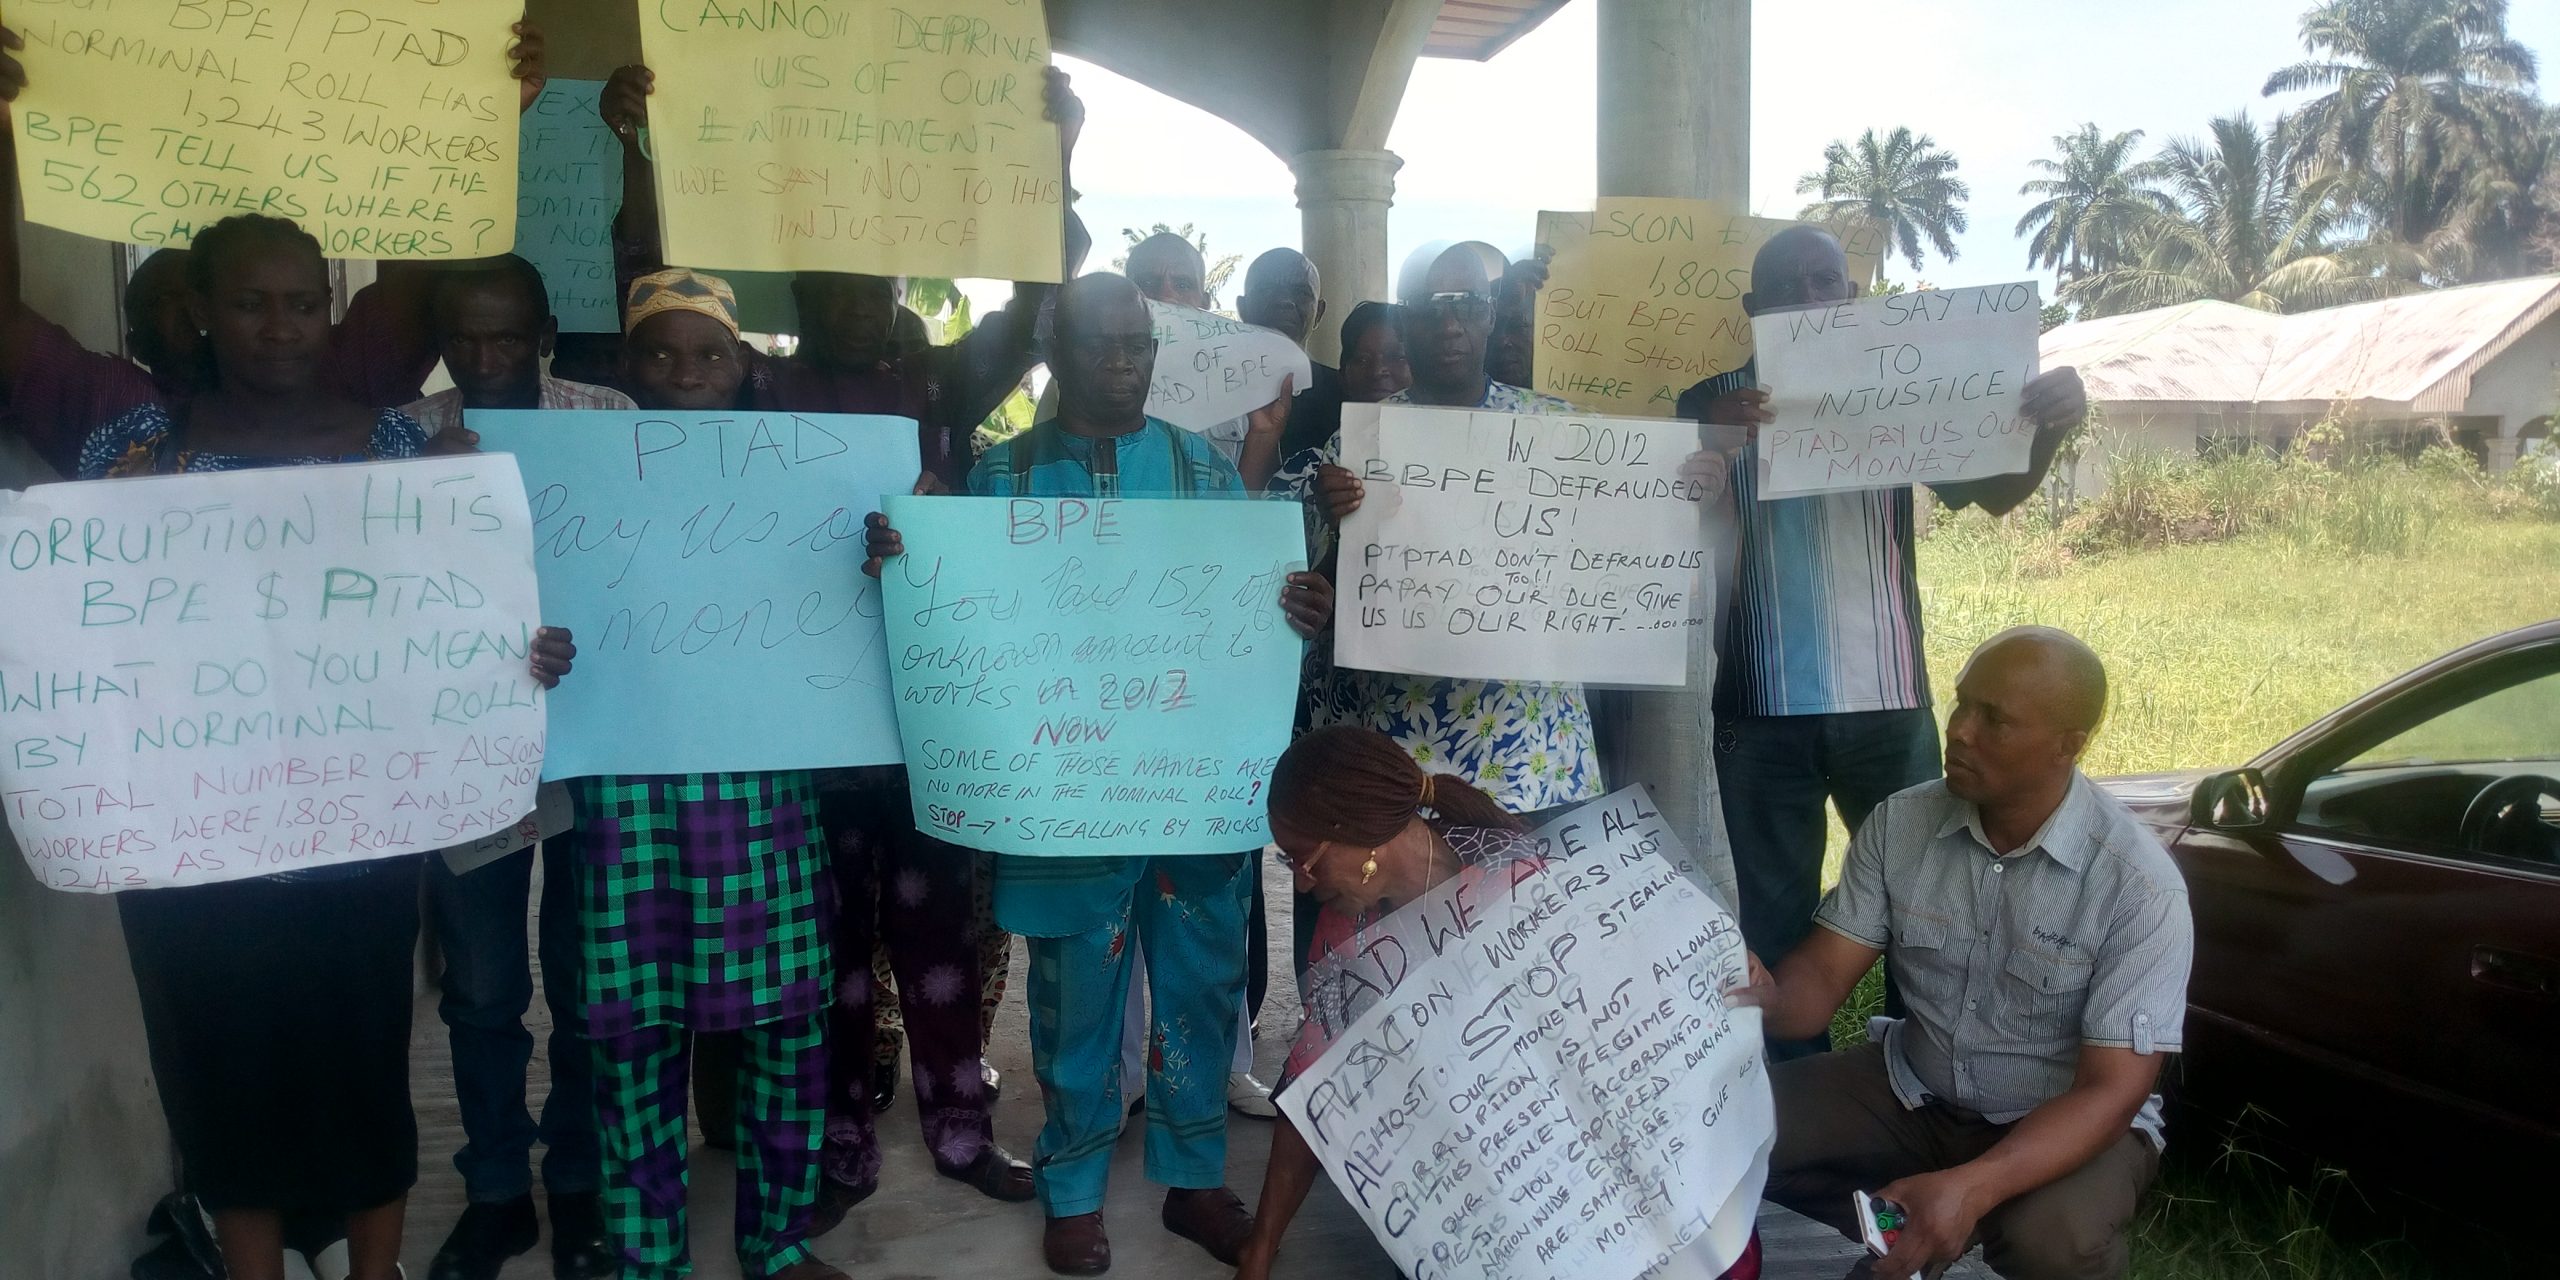 Ex-ALSCON workers protest, threaten to sue BPE, PTAD over severance entitlements